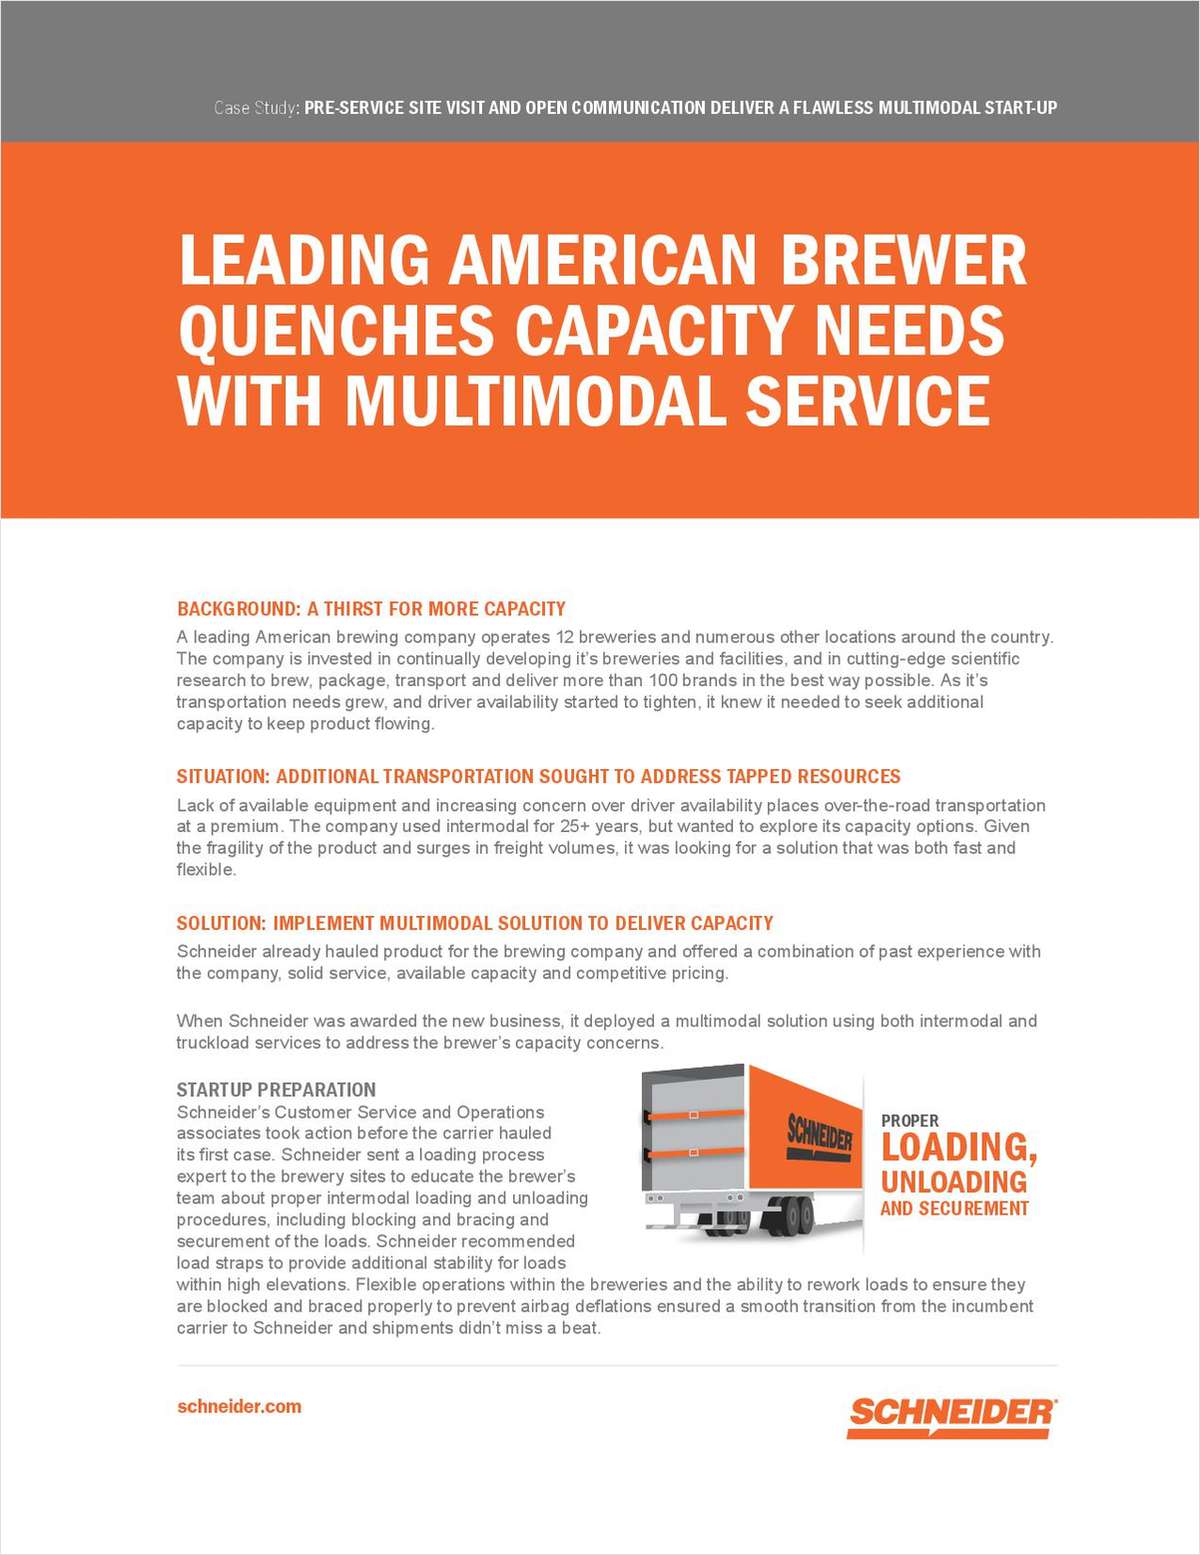 Leading American Brewer Quenches Increased Capacity